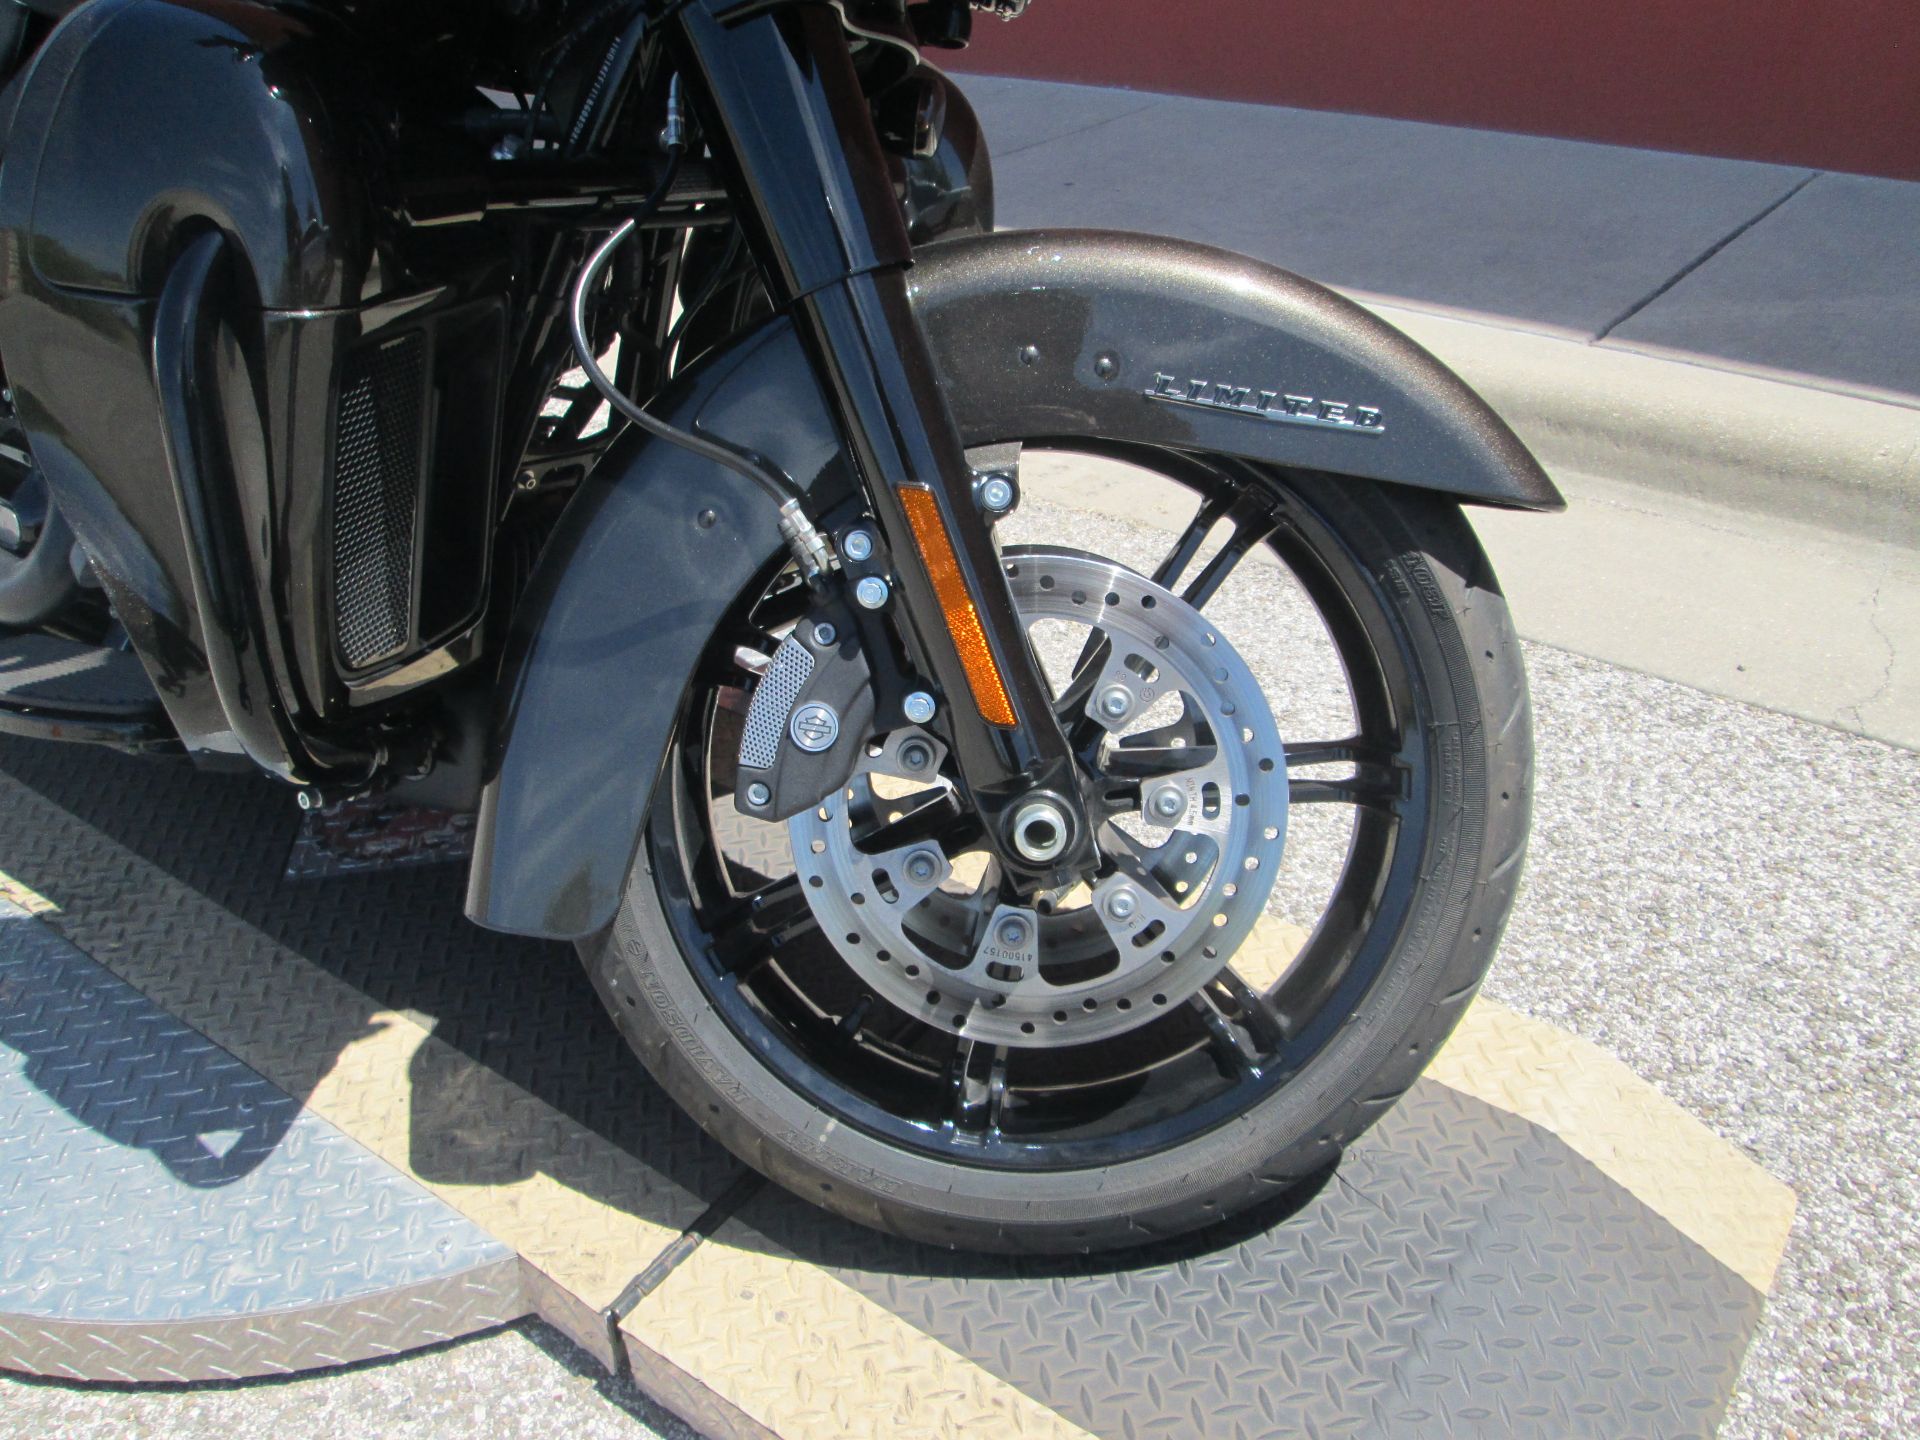 2020 Harley-Davidson Ultra Limited in Temple, Texas - Photo 5